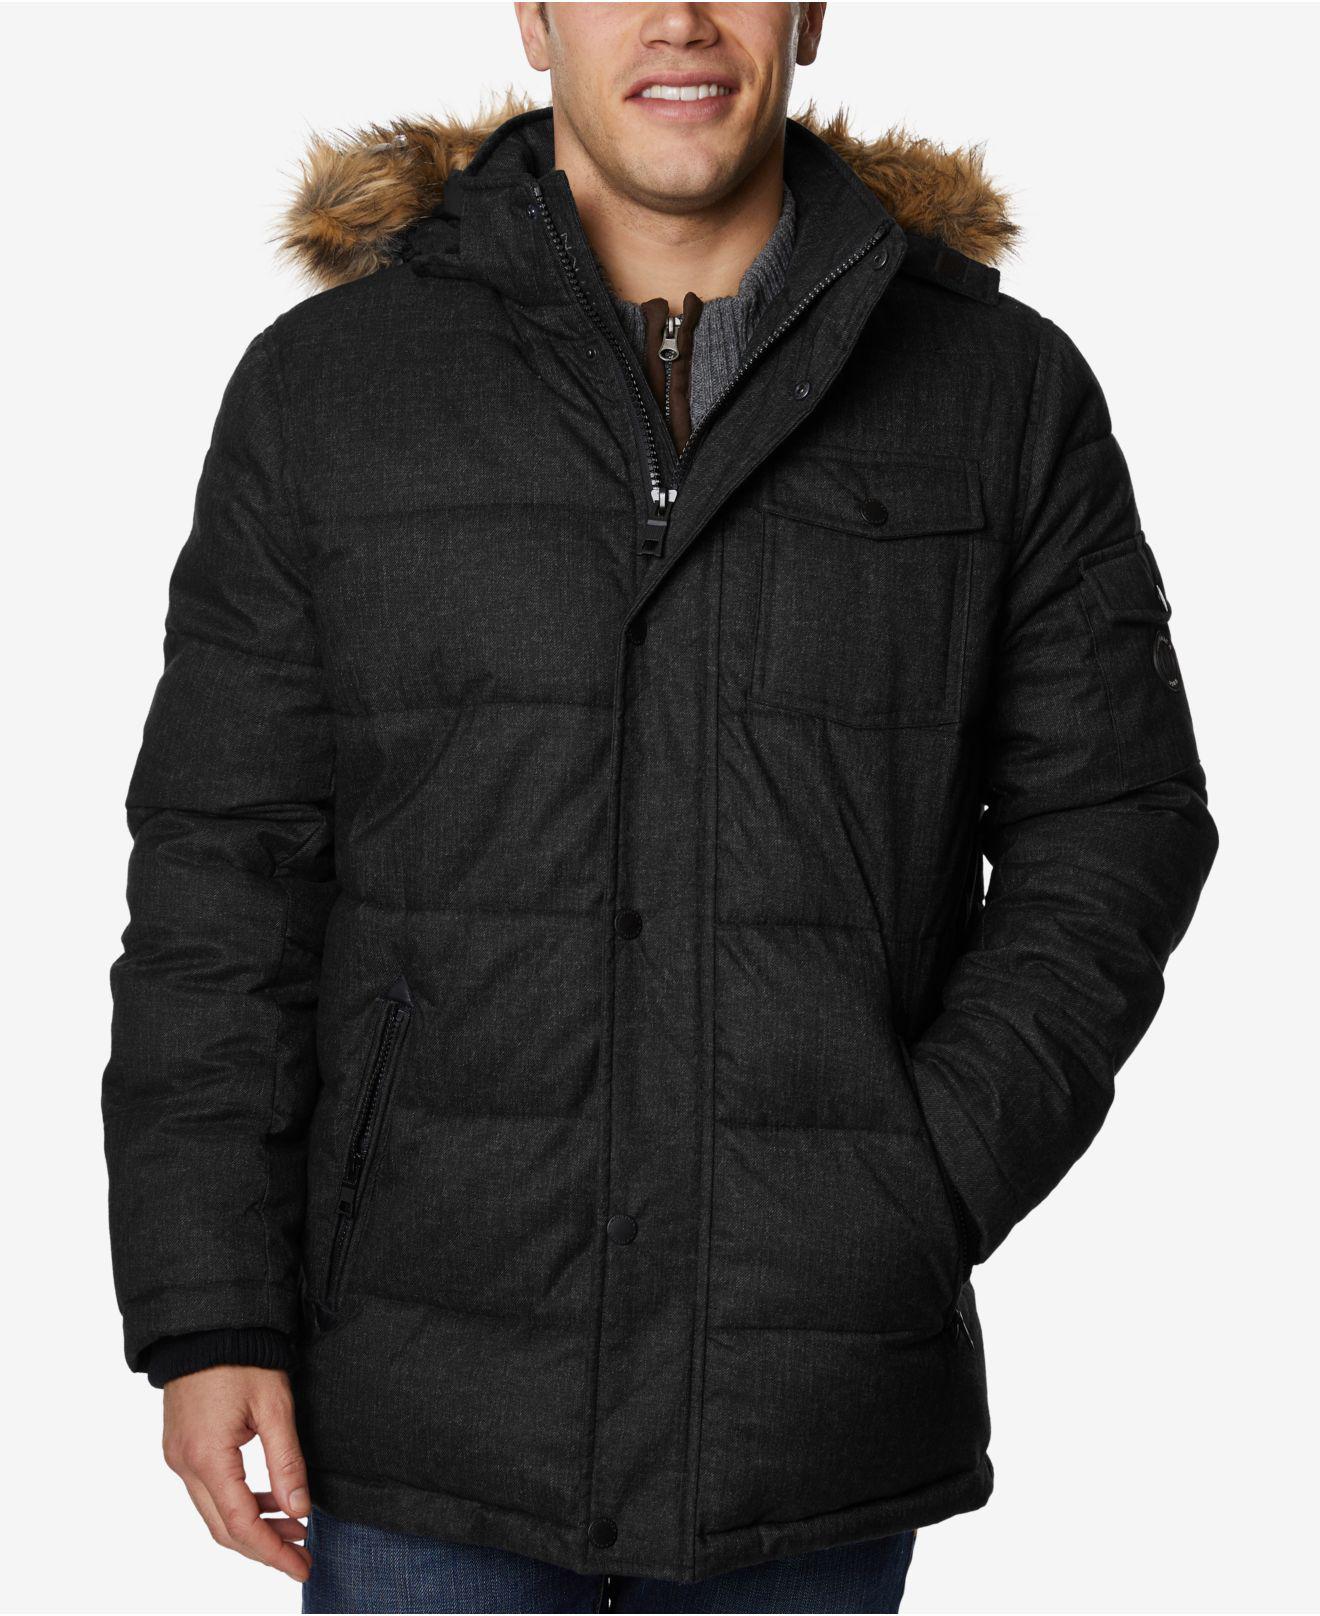 Nautica Quilted Hooded Parka in Black Print (Black) for Men - Lyst